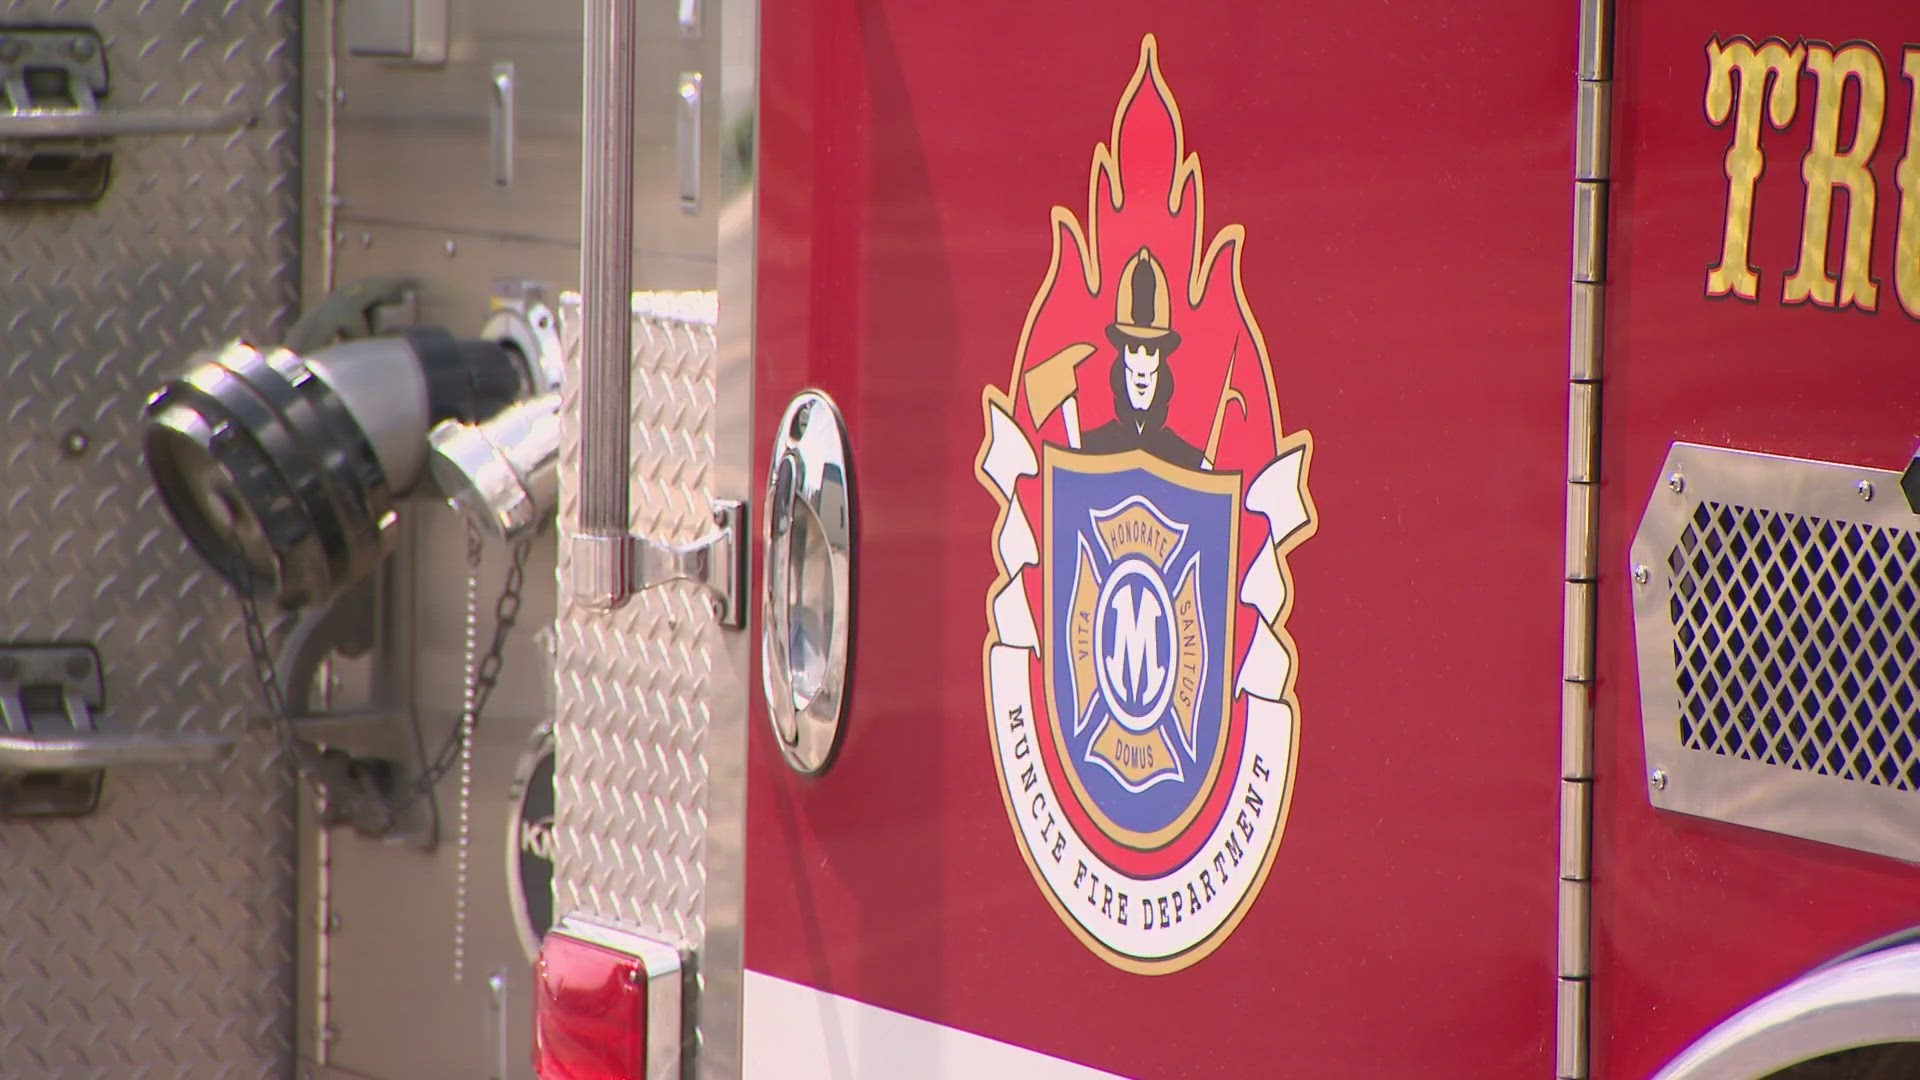 Three investigations allege that firefighters and EMTs were able to cheat on their certification exams after being provided actual test questions and answers.